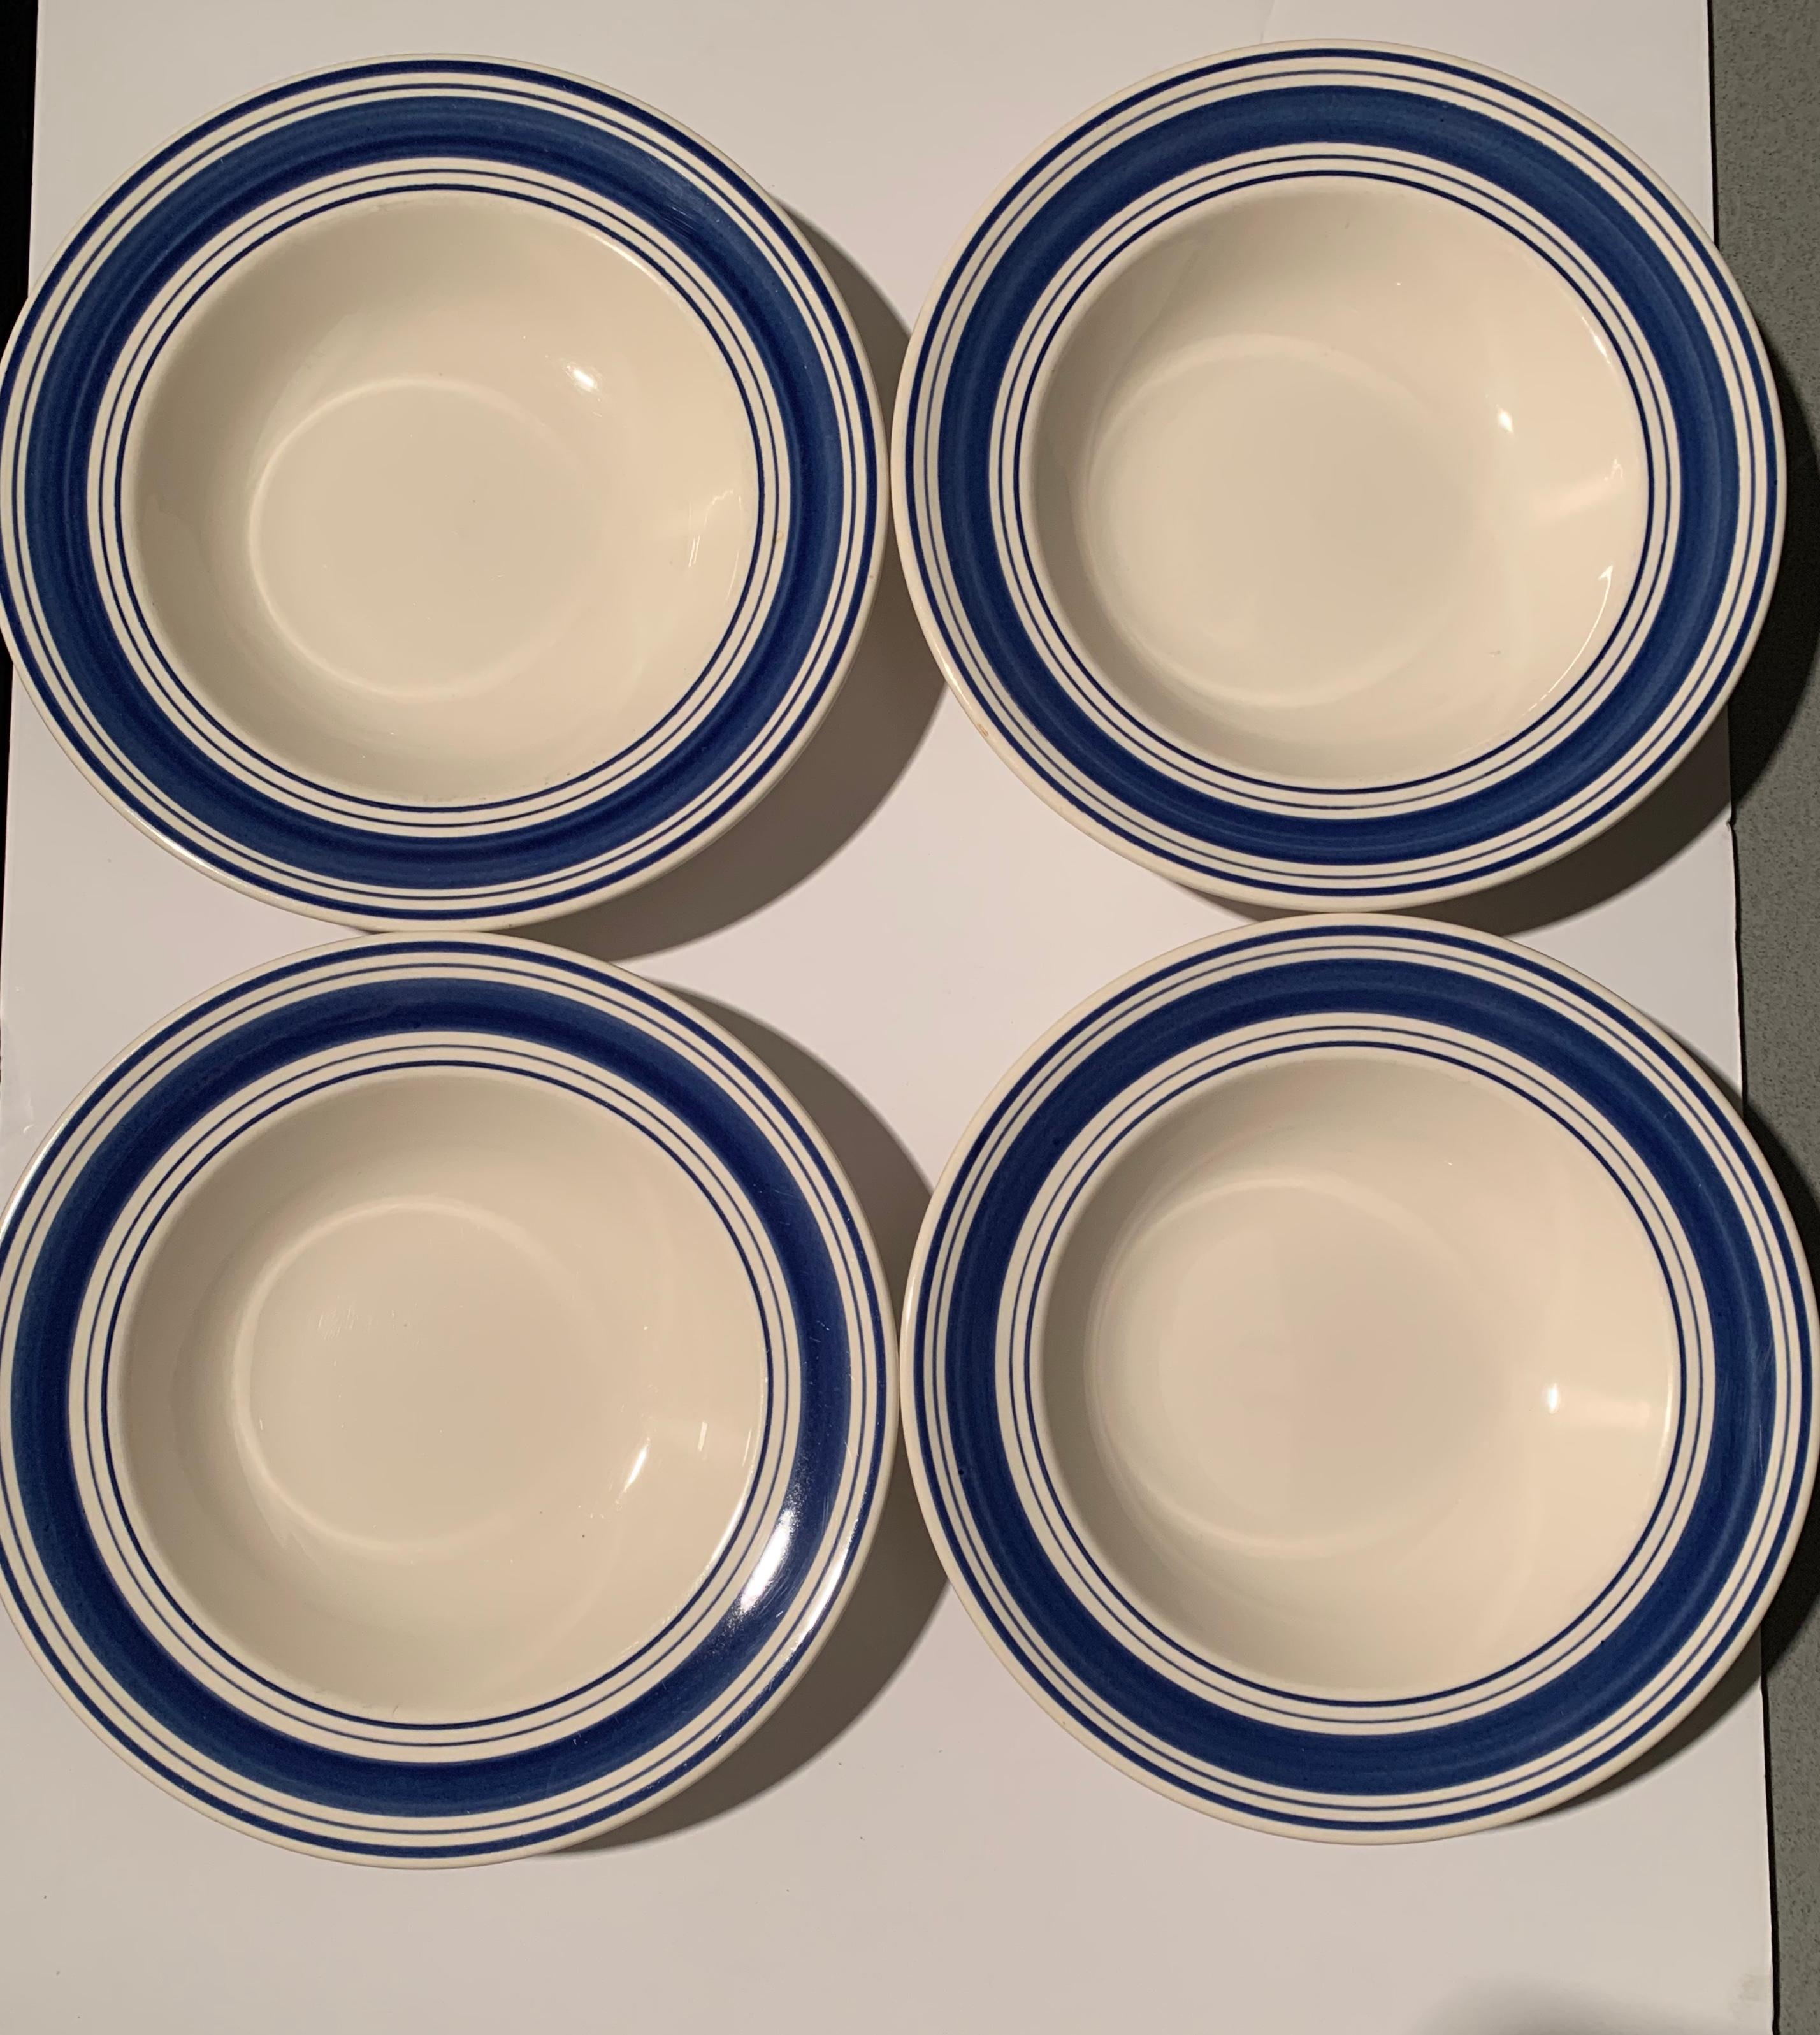 A set of four (4) rimmed soup bowls / pasta bowls in the Farmstead blue and white pattern by Ralph Lauren Home collection. Signed. Ironstone. Made in England; circa 1990.

Features a blue and white ticking-inspired striped border on white.